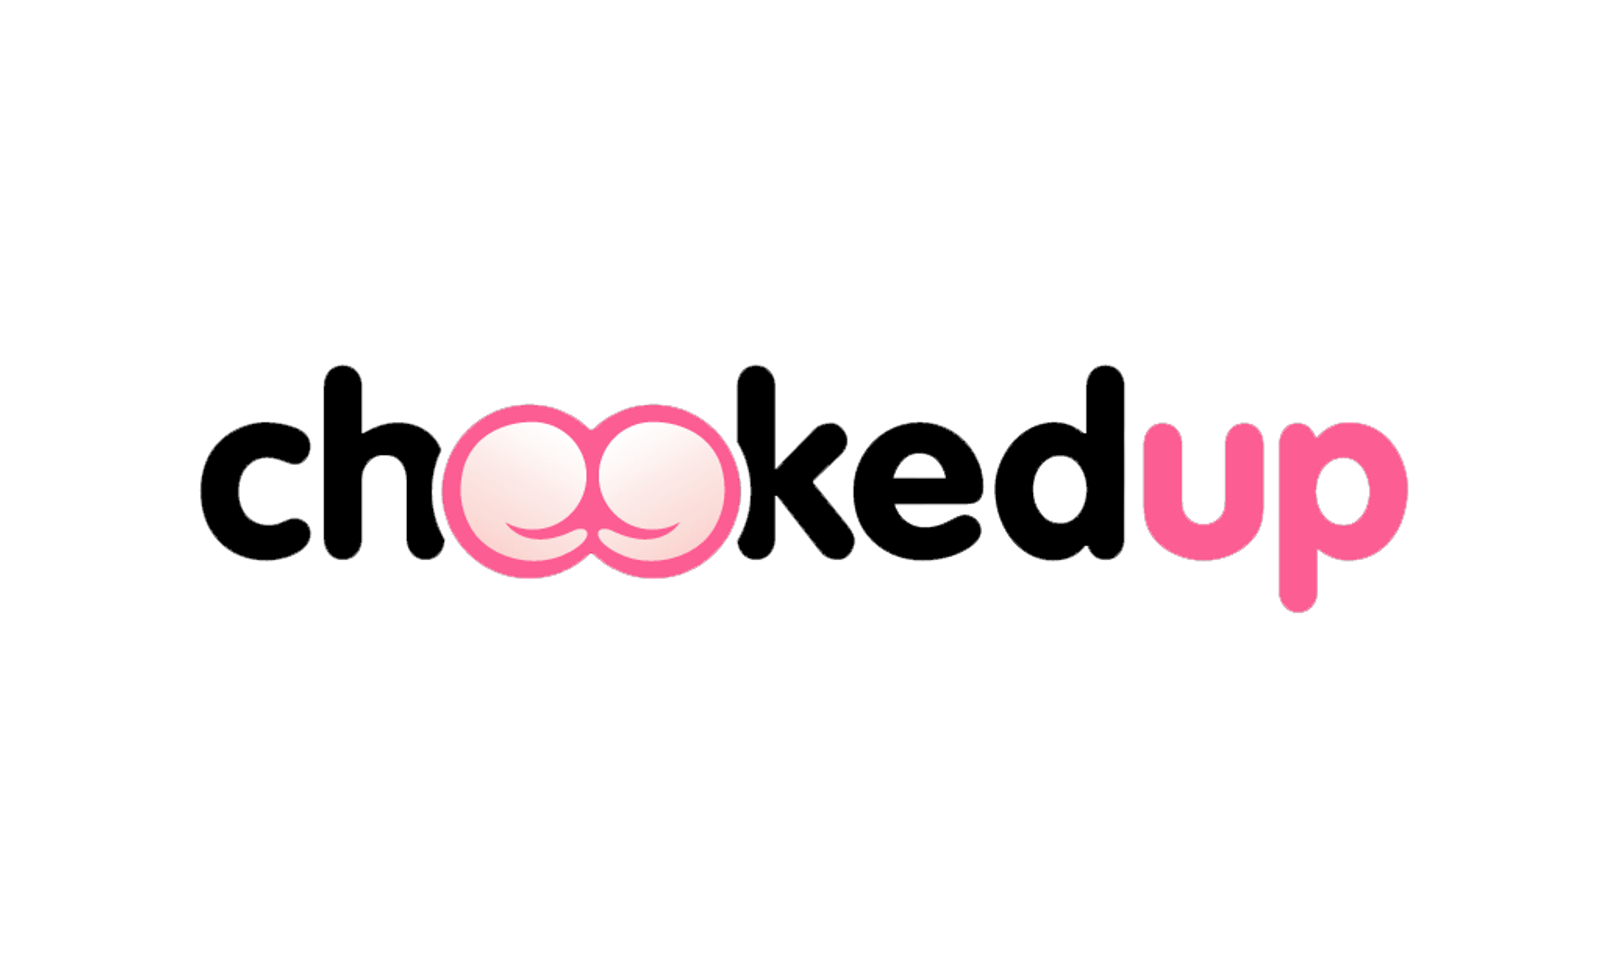 New Creator Site CheekedUp Launches